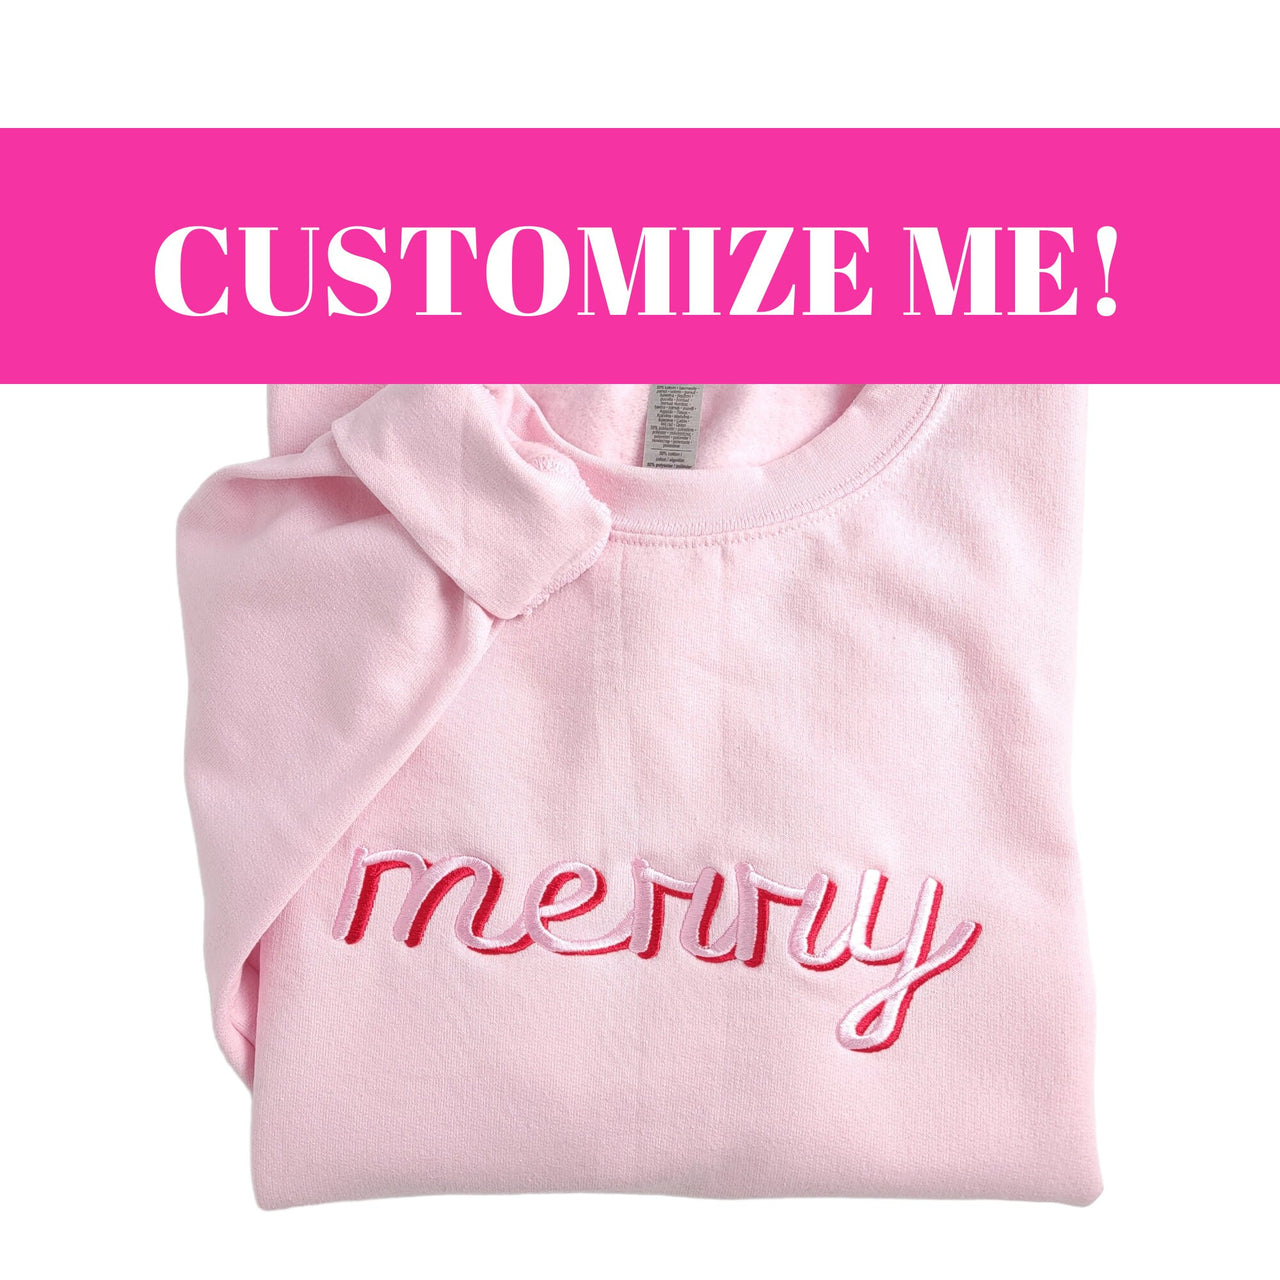 Design Your Embroidered Sweatshirt For or Men Cursive – SewingSeams